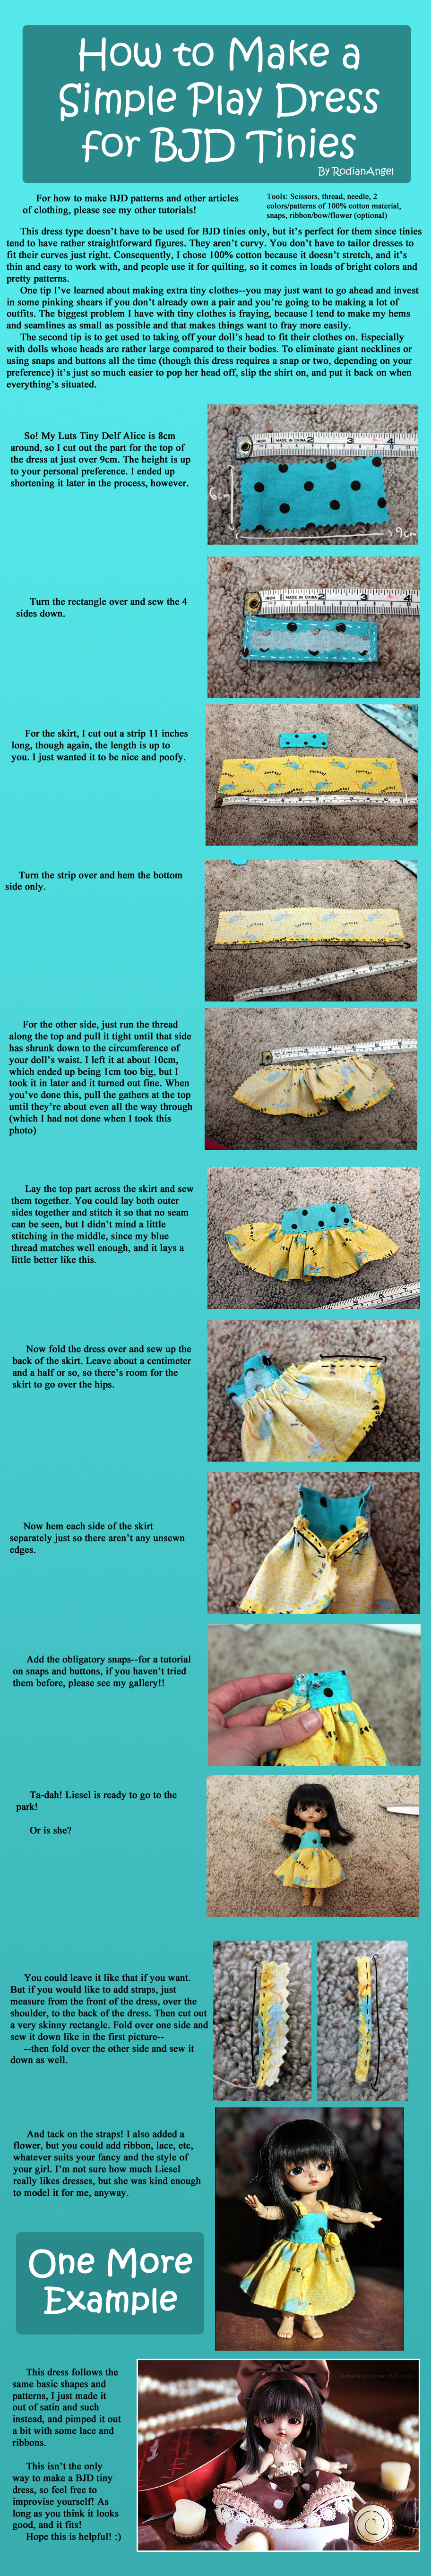 http://orig07.deviantart.net/db83/f/2015/027/4/4/how_to_make_a_simple_play_dress_for_bjd_tinies_by_rodianangel-d8fmrh9.jpg